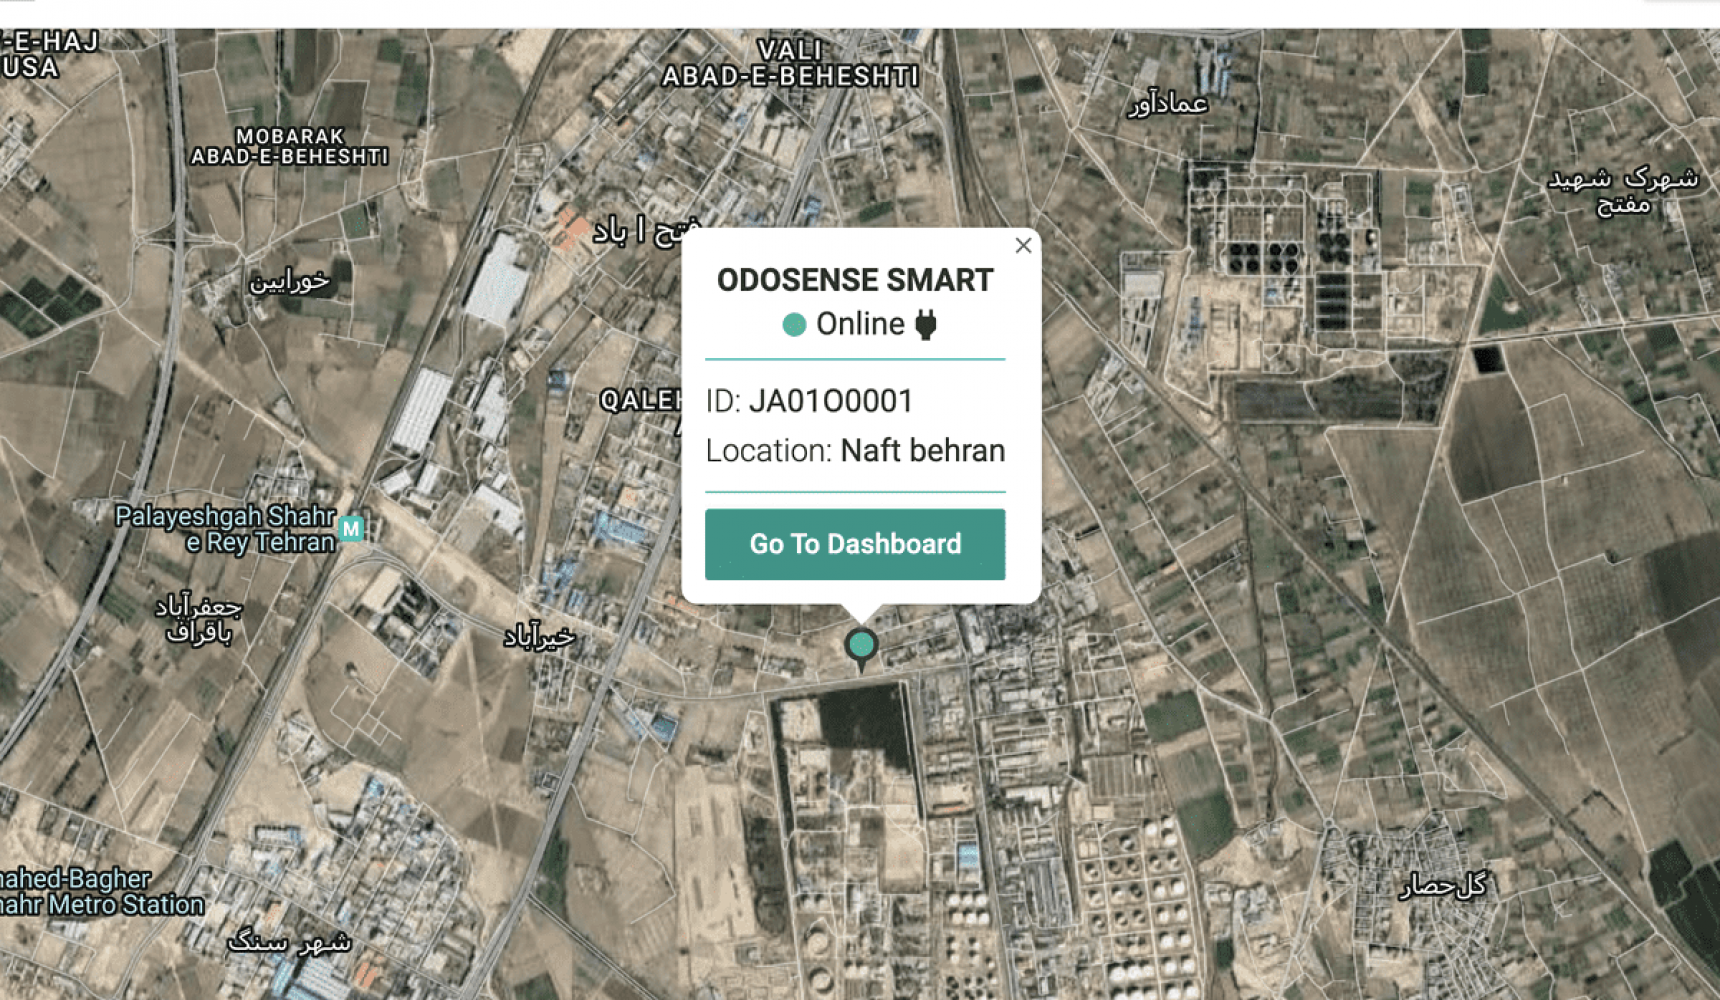 Oizom's software on the Air quality monitoring system in Tehran